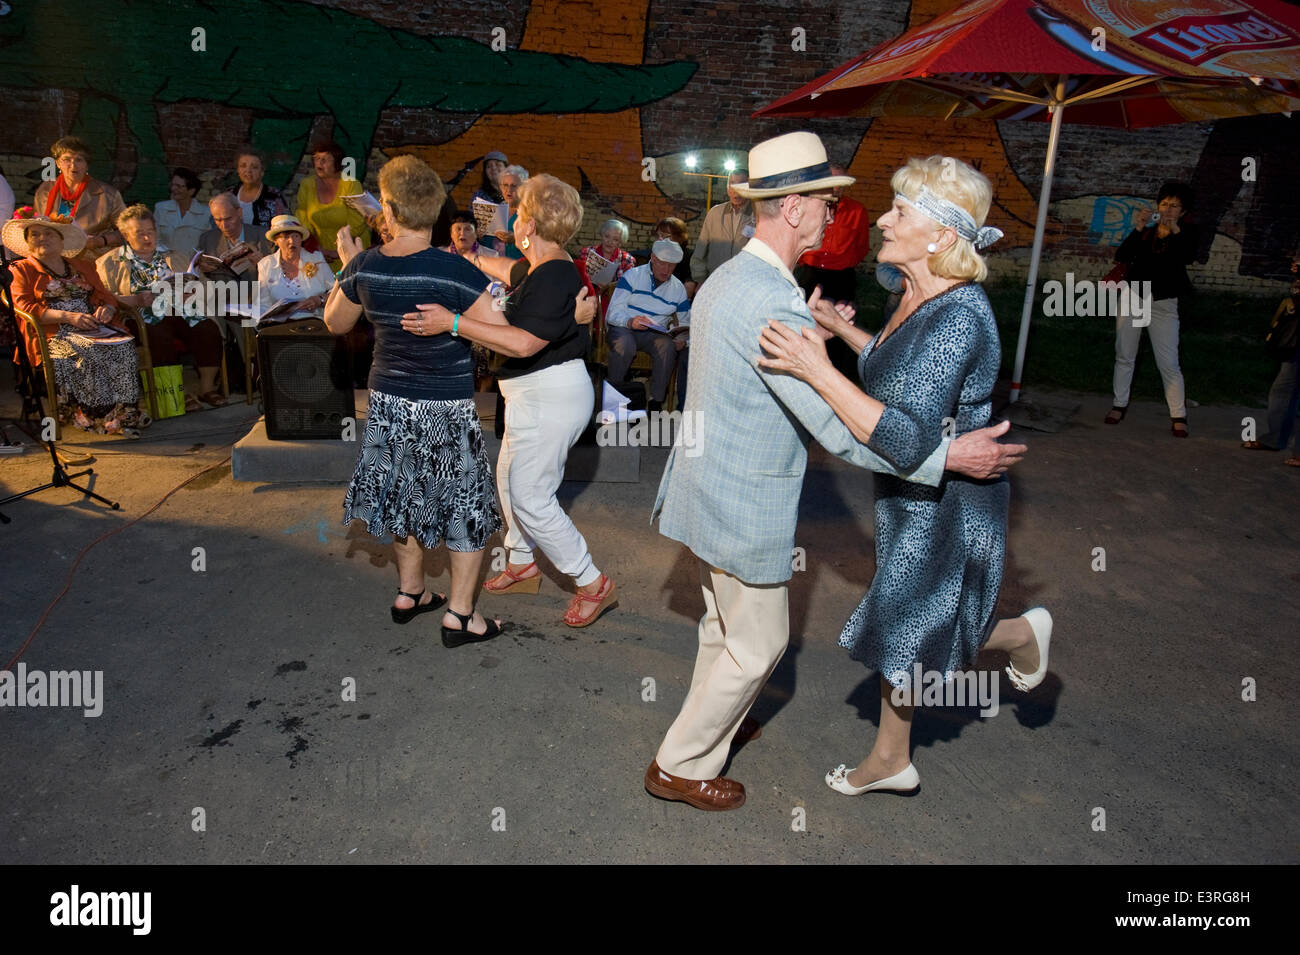 Warsaw, Poland. 27th June, 2014. Friday night is party time, even for residents of a retirement home in the old, eastern part of Warsaw, the capital of Poland. Accompanied by young musicians, the informal choir of golden agers presented a number of traditional urban folklore songs. After sunset, fleet-footed blue-hairs filled the open-air dance floor at Brzeska Street. Credit:  Henryk Kotowski/Alamy Live News Stock Photo